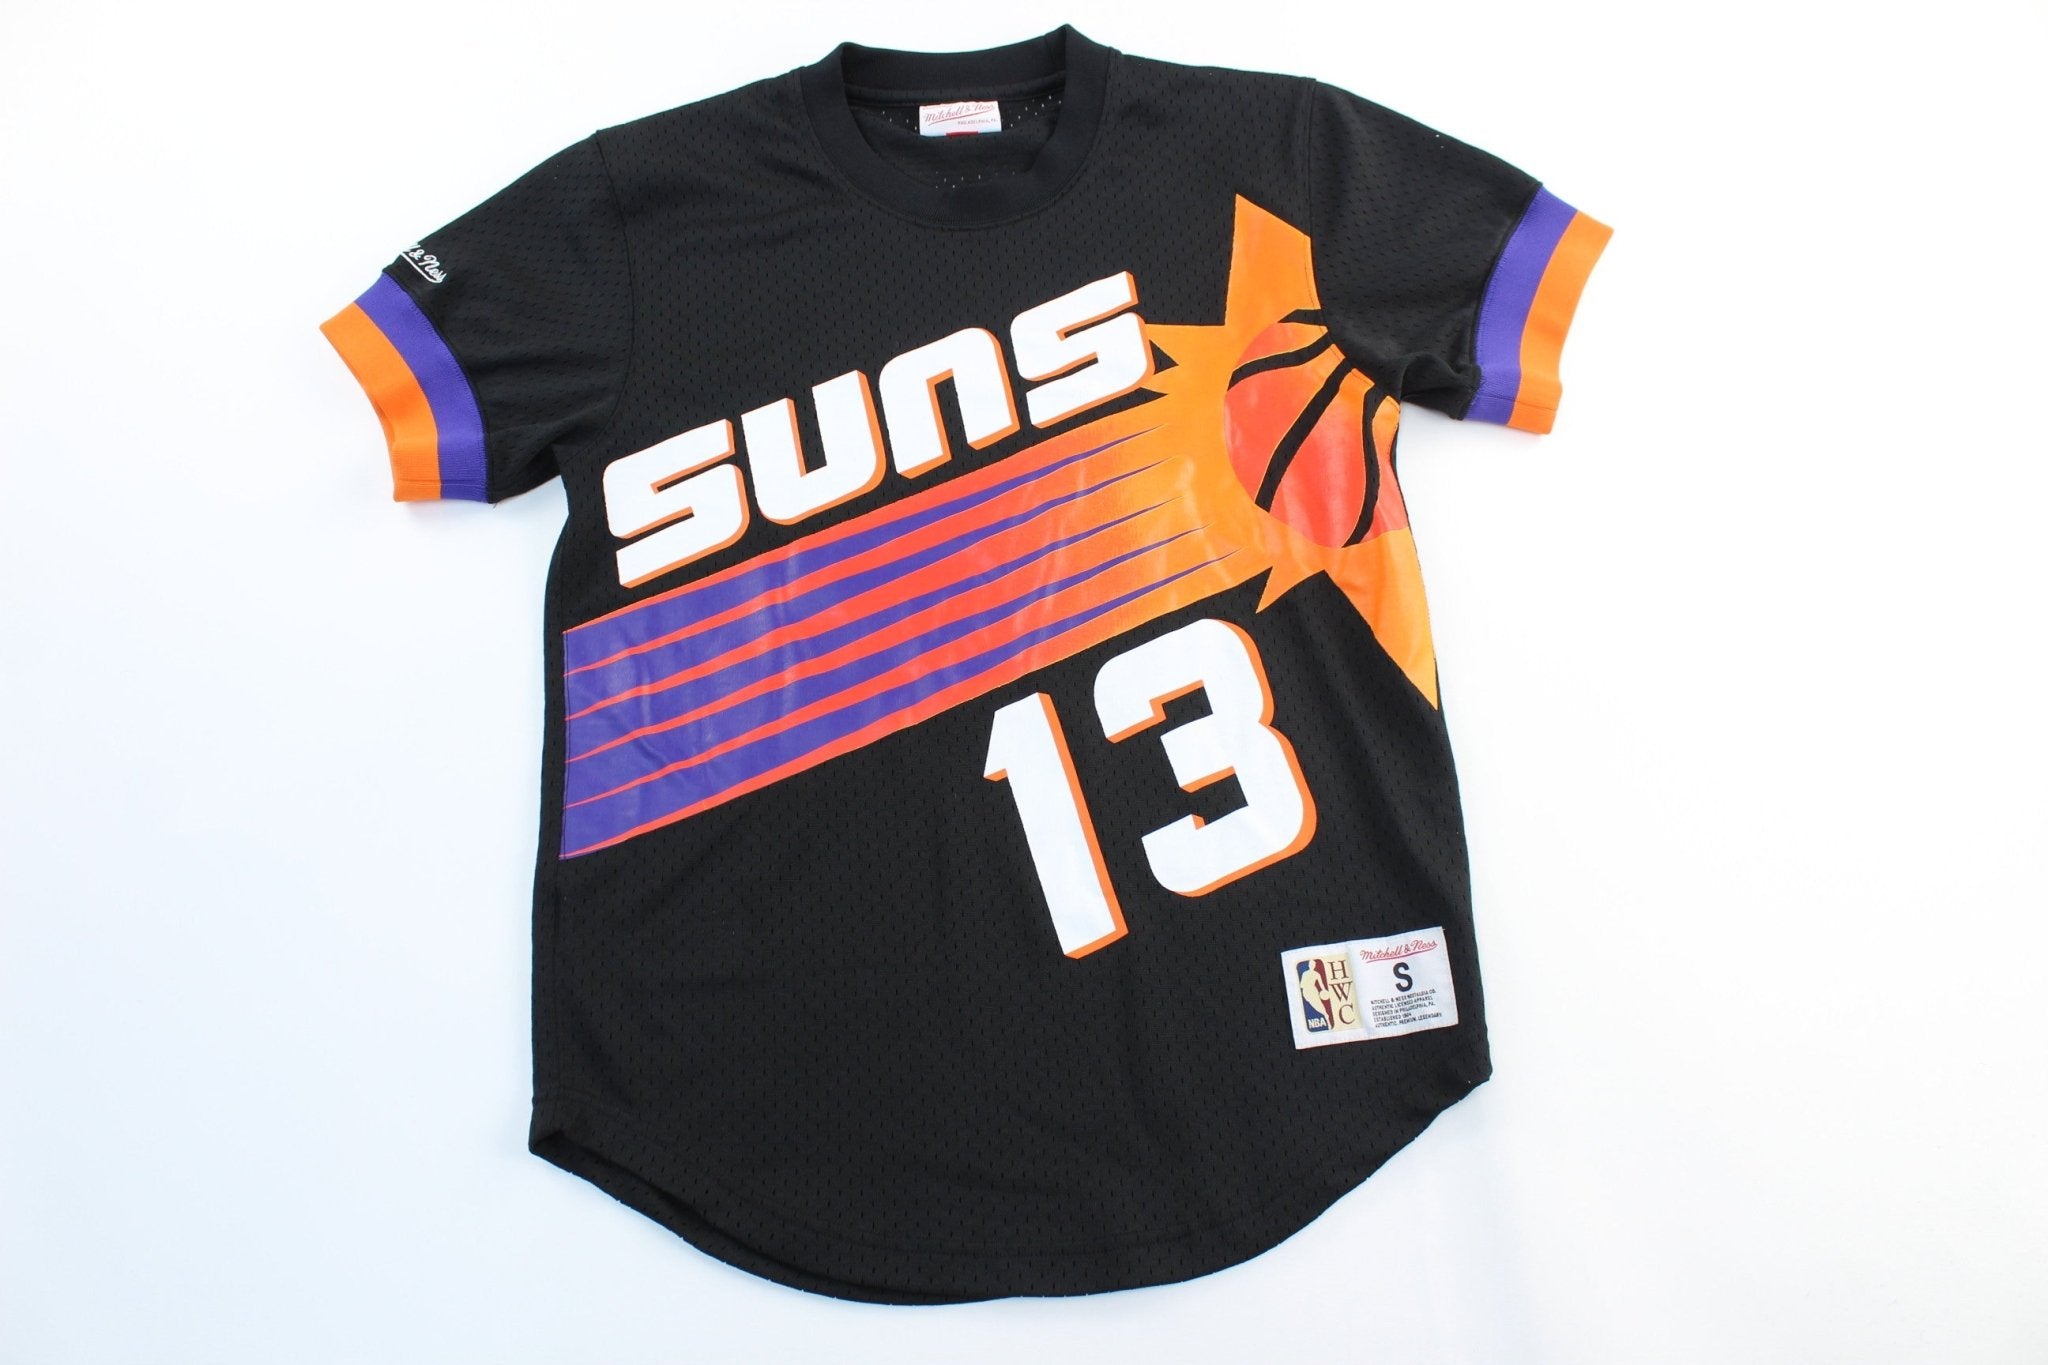 steve nash jersey mitchell and ness